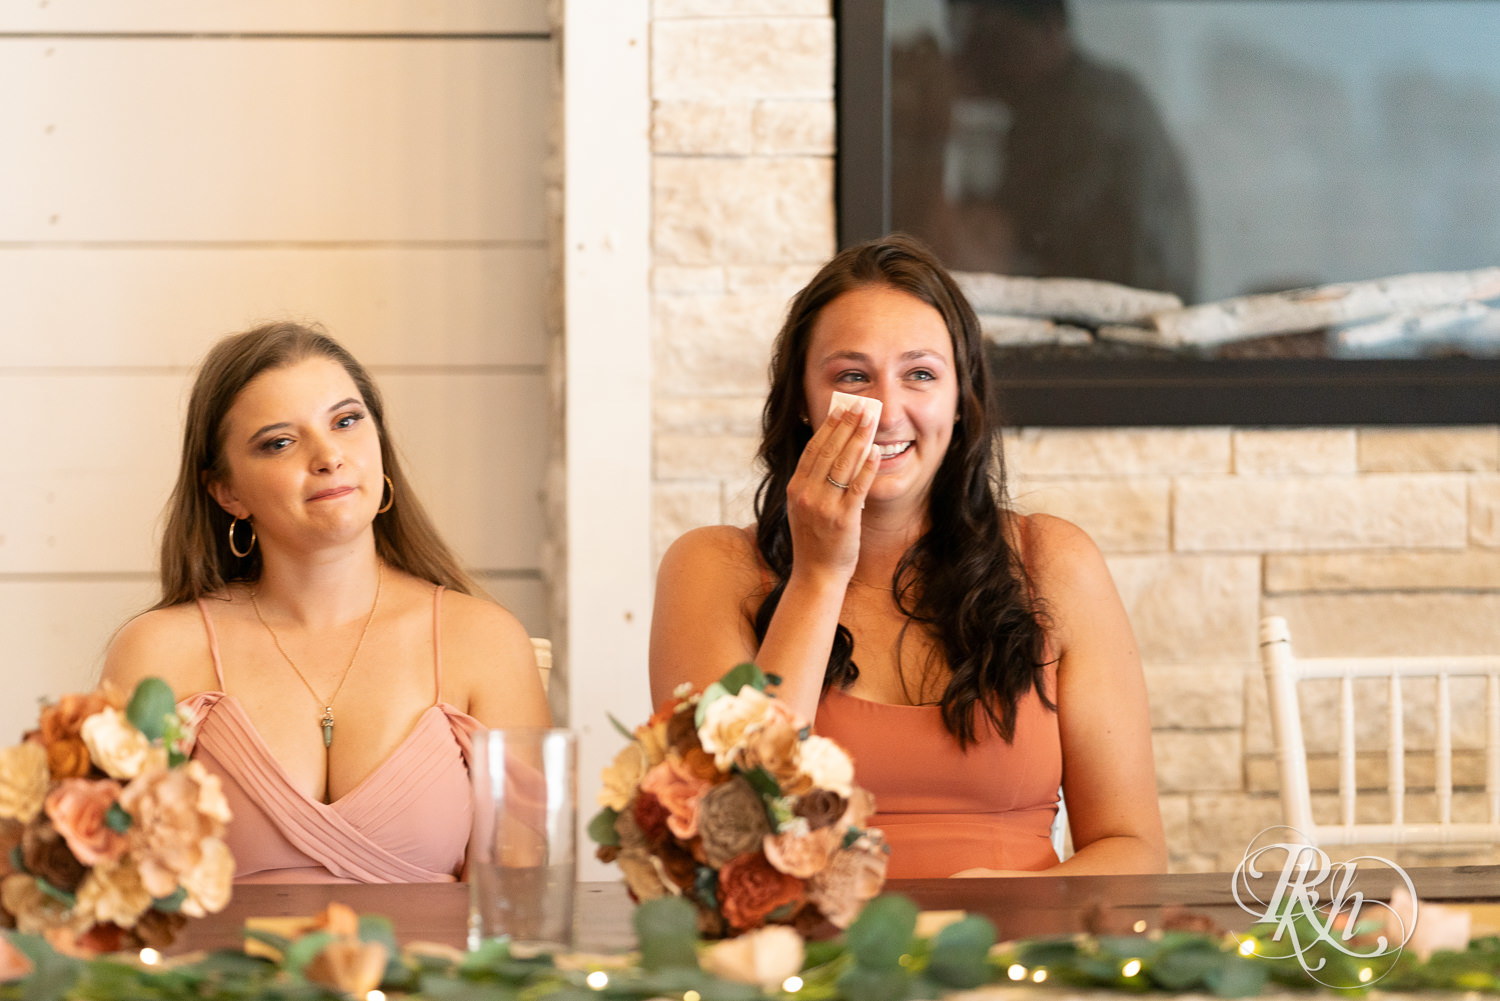 Bridesmaid cries watching bride and groom share first dance at wedding reception at Cottage Farmhouse in Glencoe, Minnesota.